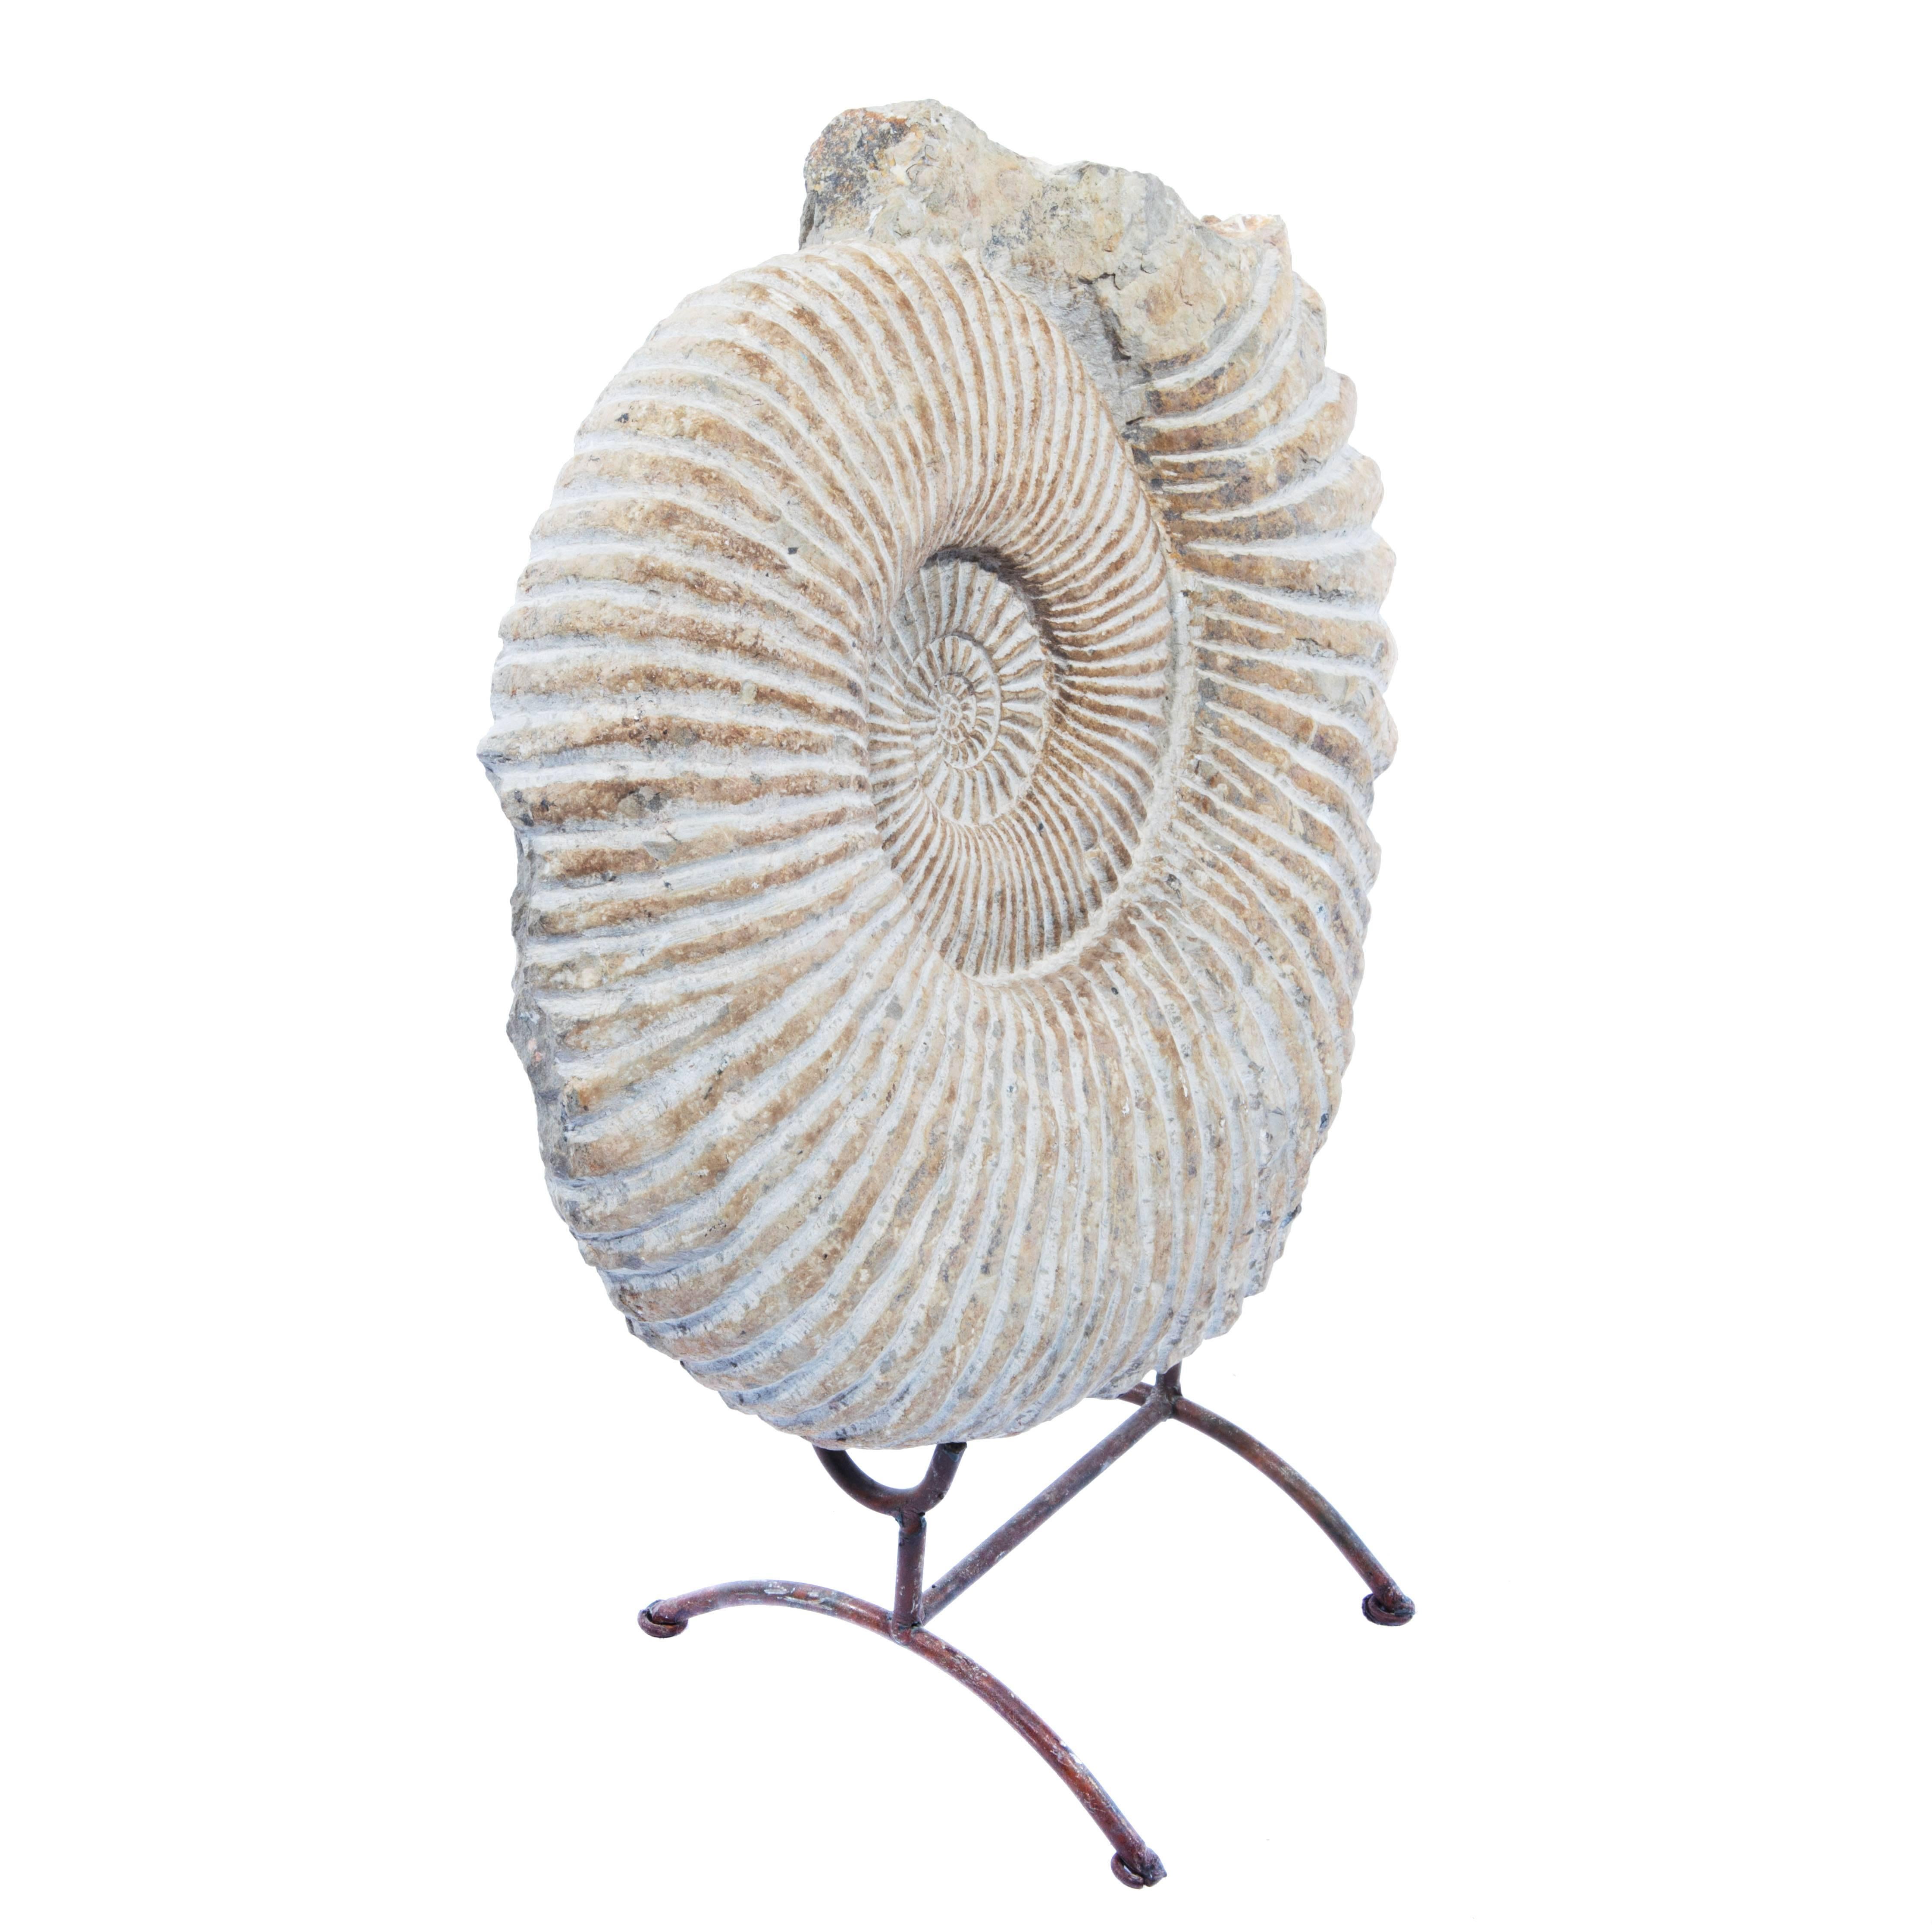 ammonite fossil stand